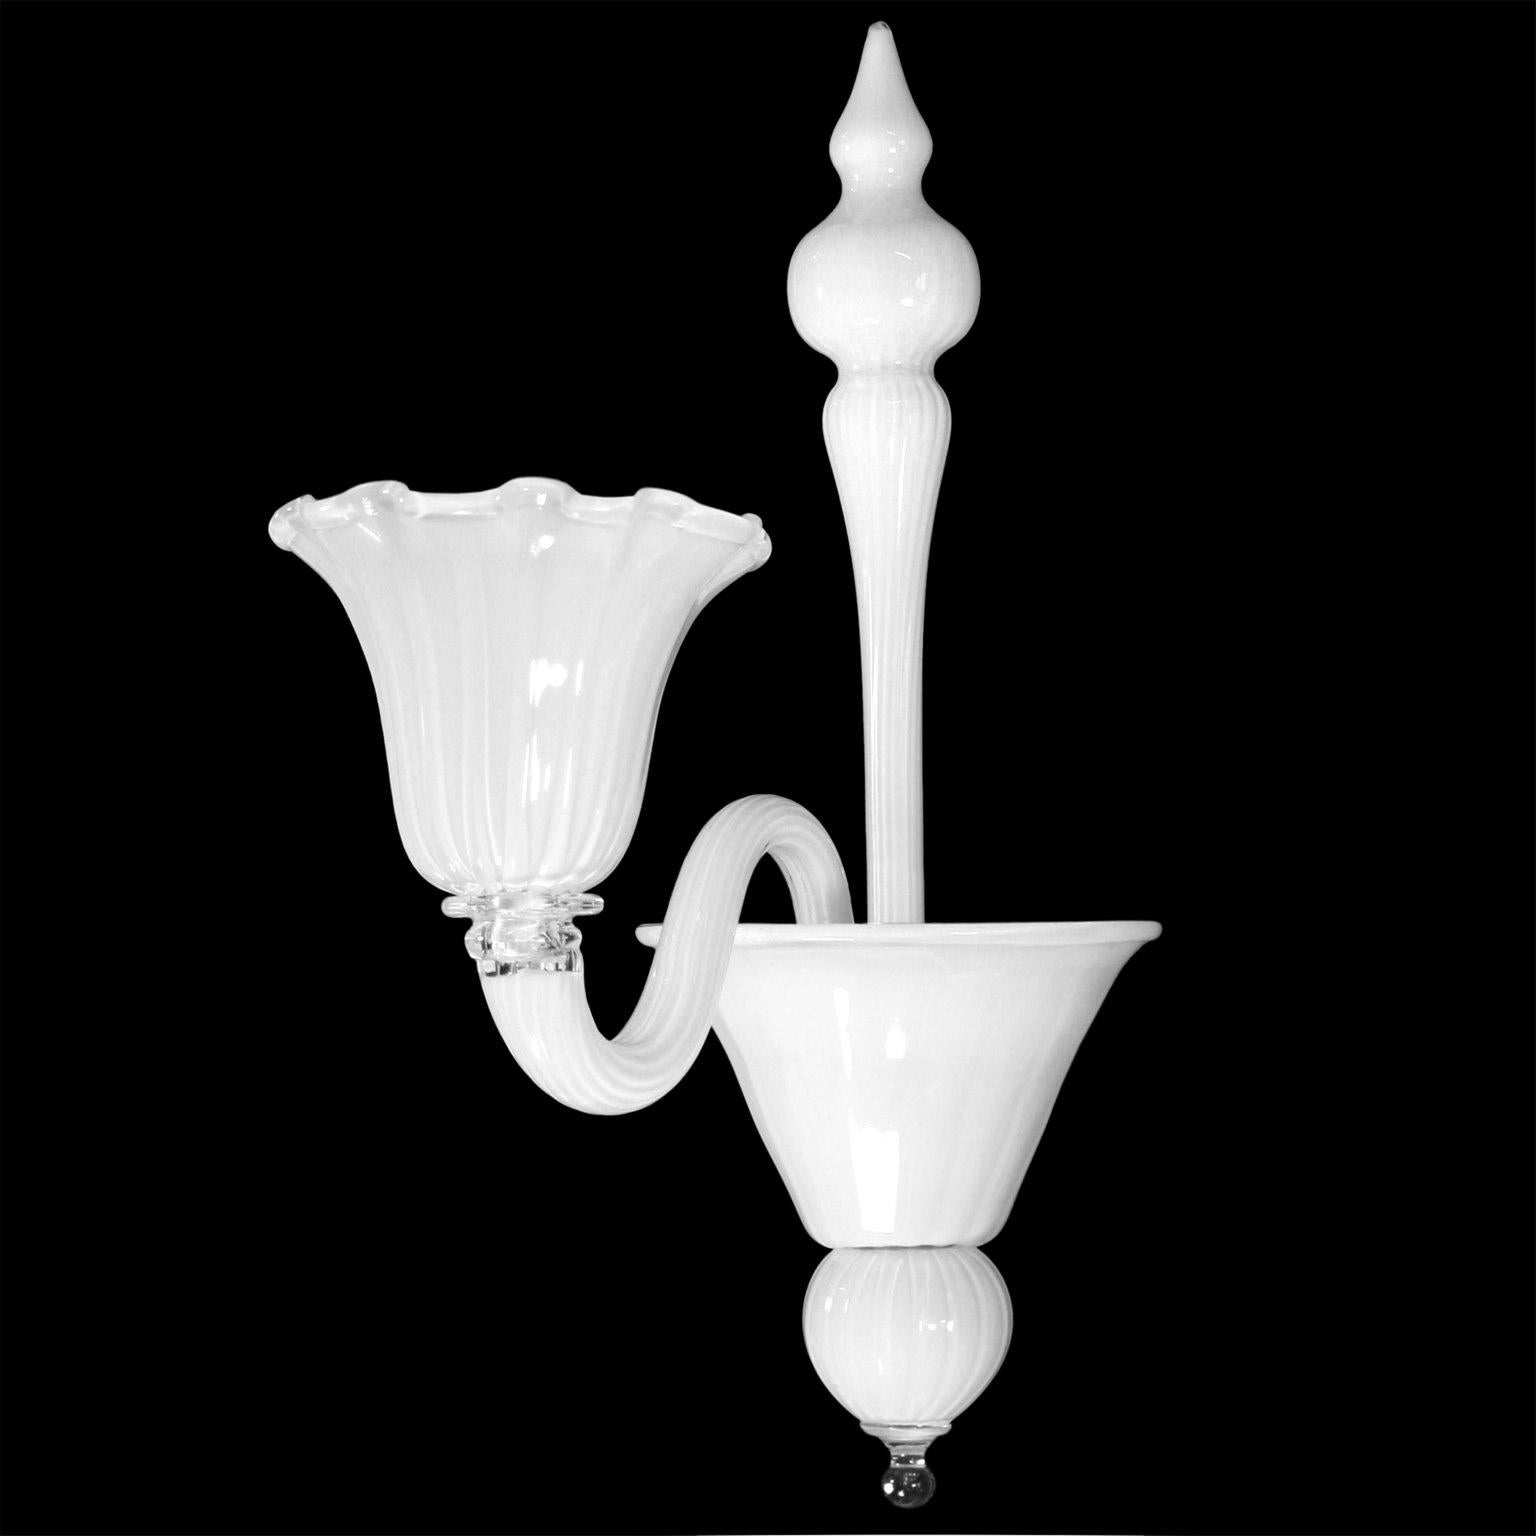 Bellepoque sconce 1 light, white encased Murano glass upward light by Multiforme.
Bellepoque 364 from the Timeless collection is a collection that evokes the atmosphere of the beginning of the 19th century. The cups recall floral elements, thus